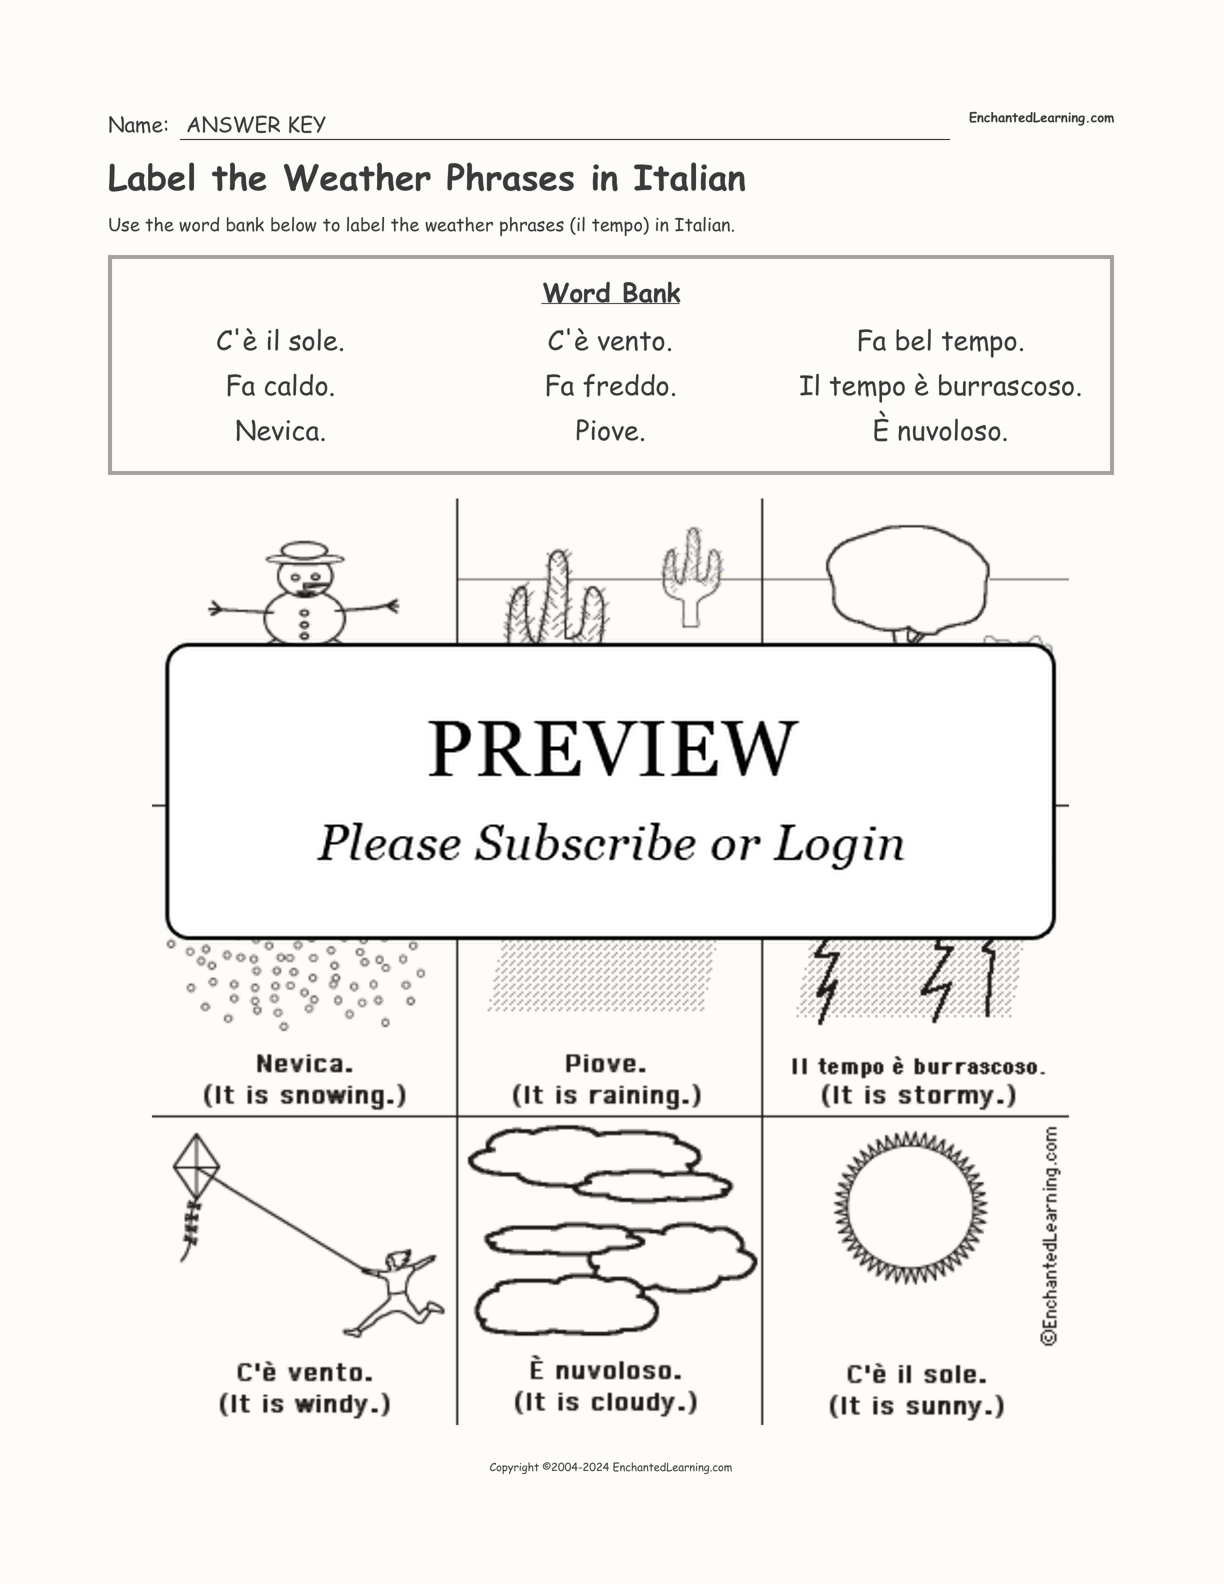 Label the Weather Phrases in Italian interactive worksheet page 2